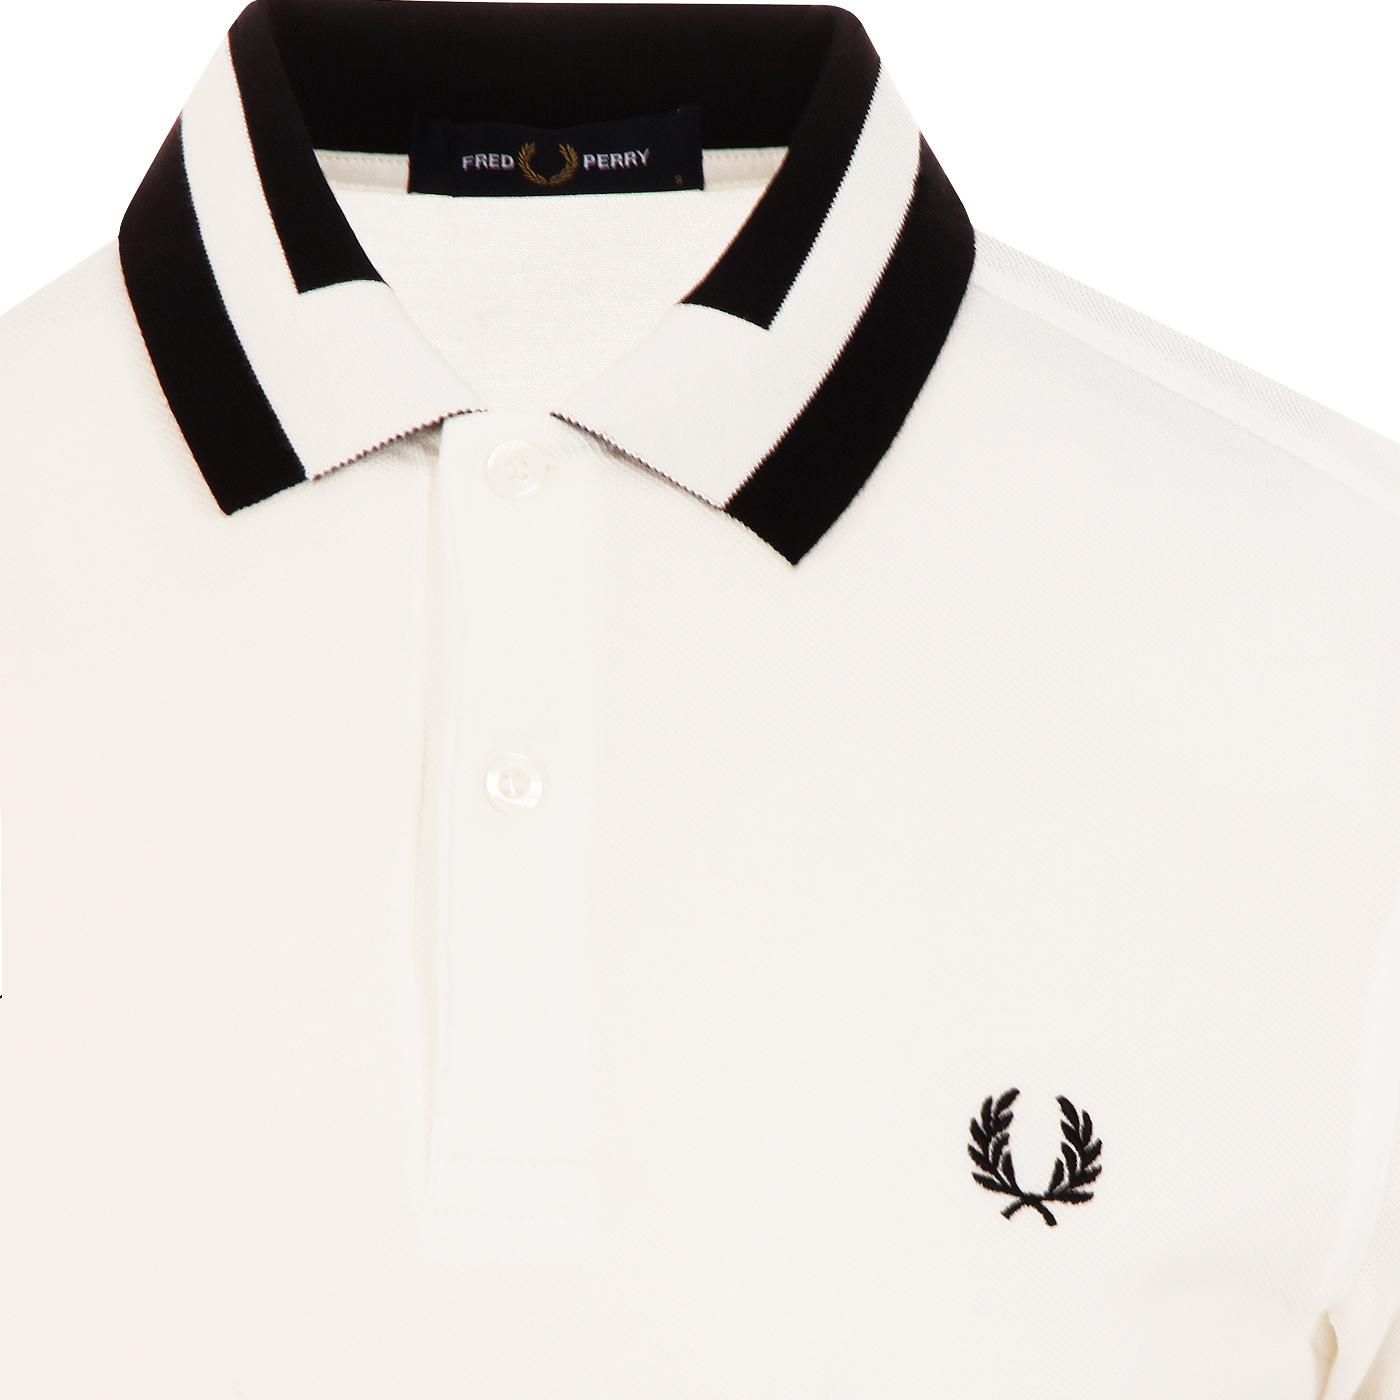 FRED PERRY Bold Tipped Retro Mod Pique Polo in White